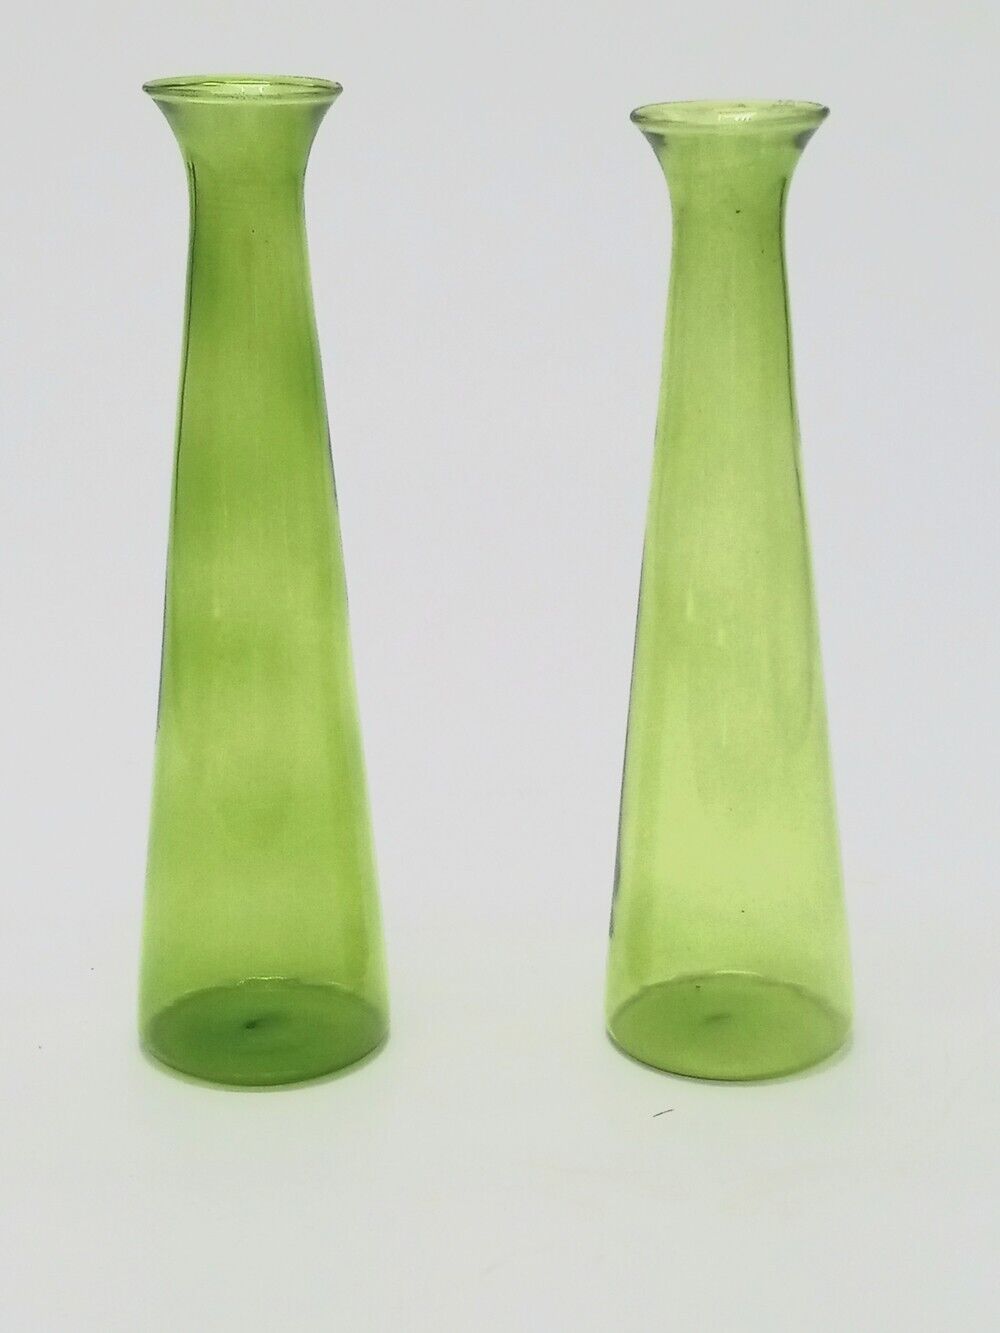 Mini Bud Vases Set of Two Light Green Colored / Decorative Vases H- 5.5 in